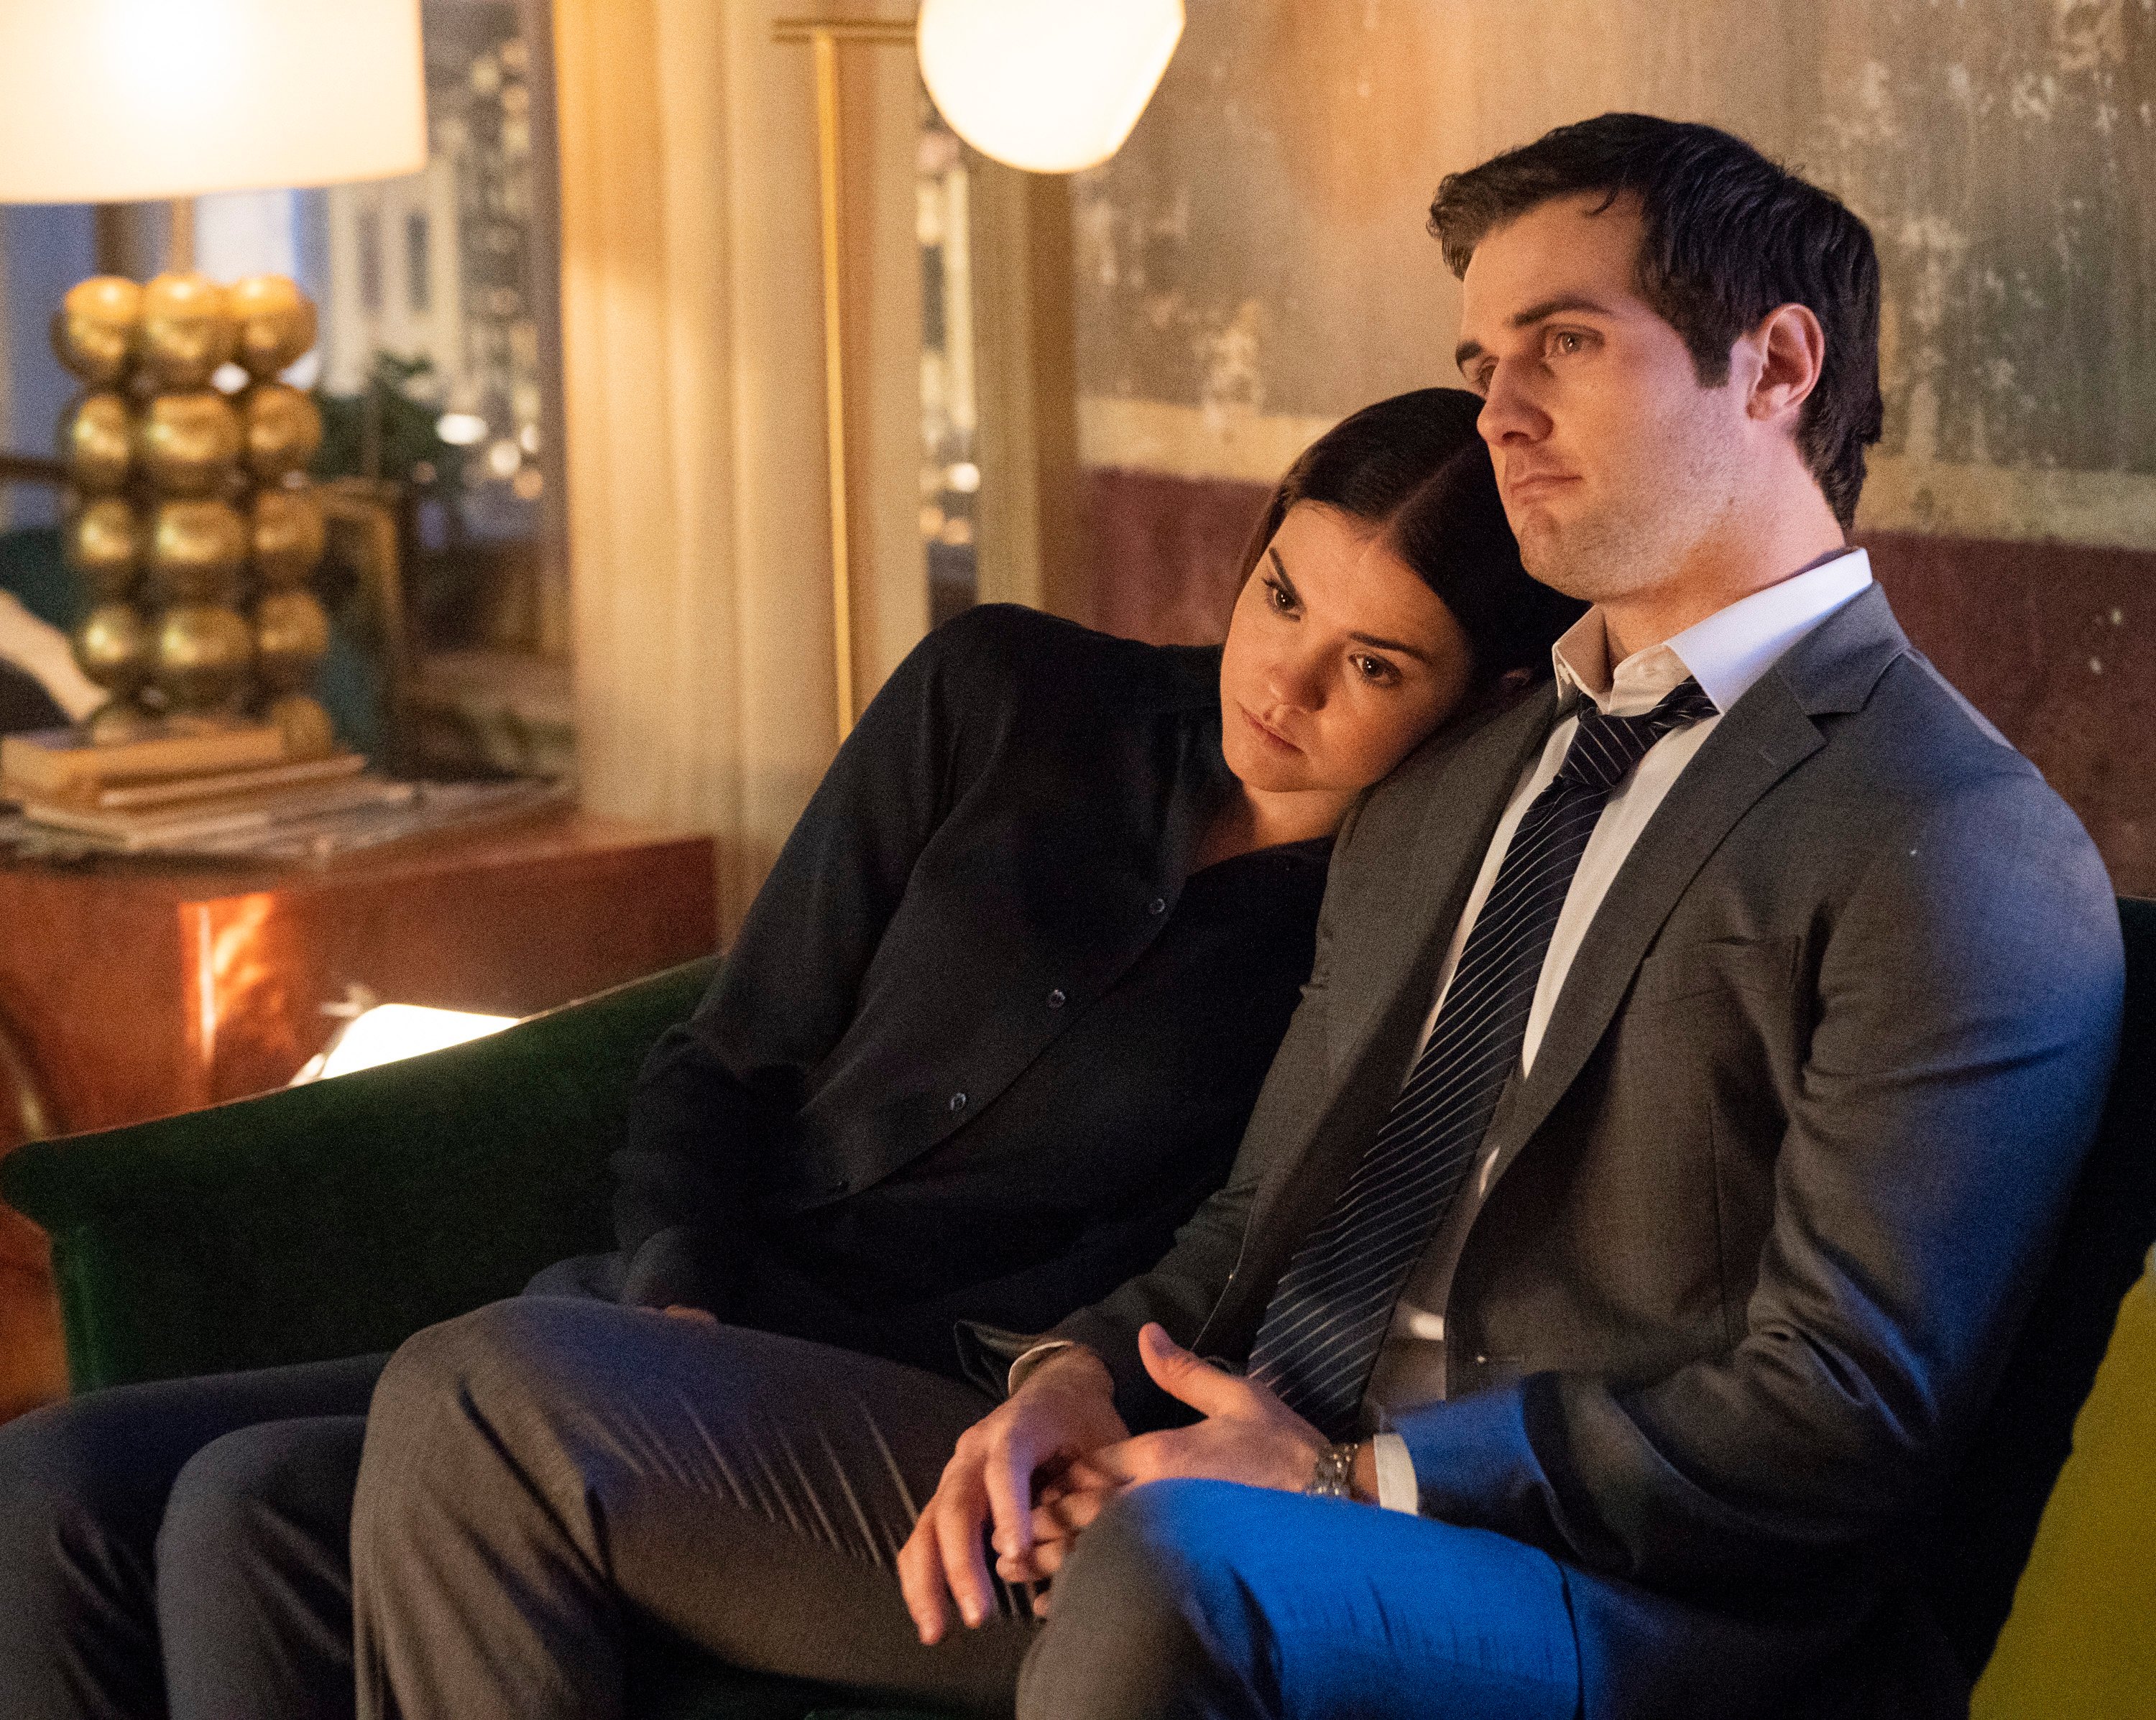 Maia Mitchell and Beau Mirchoff sit on a couch during a scene from 'Good Trouble.'